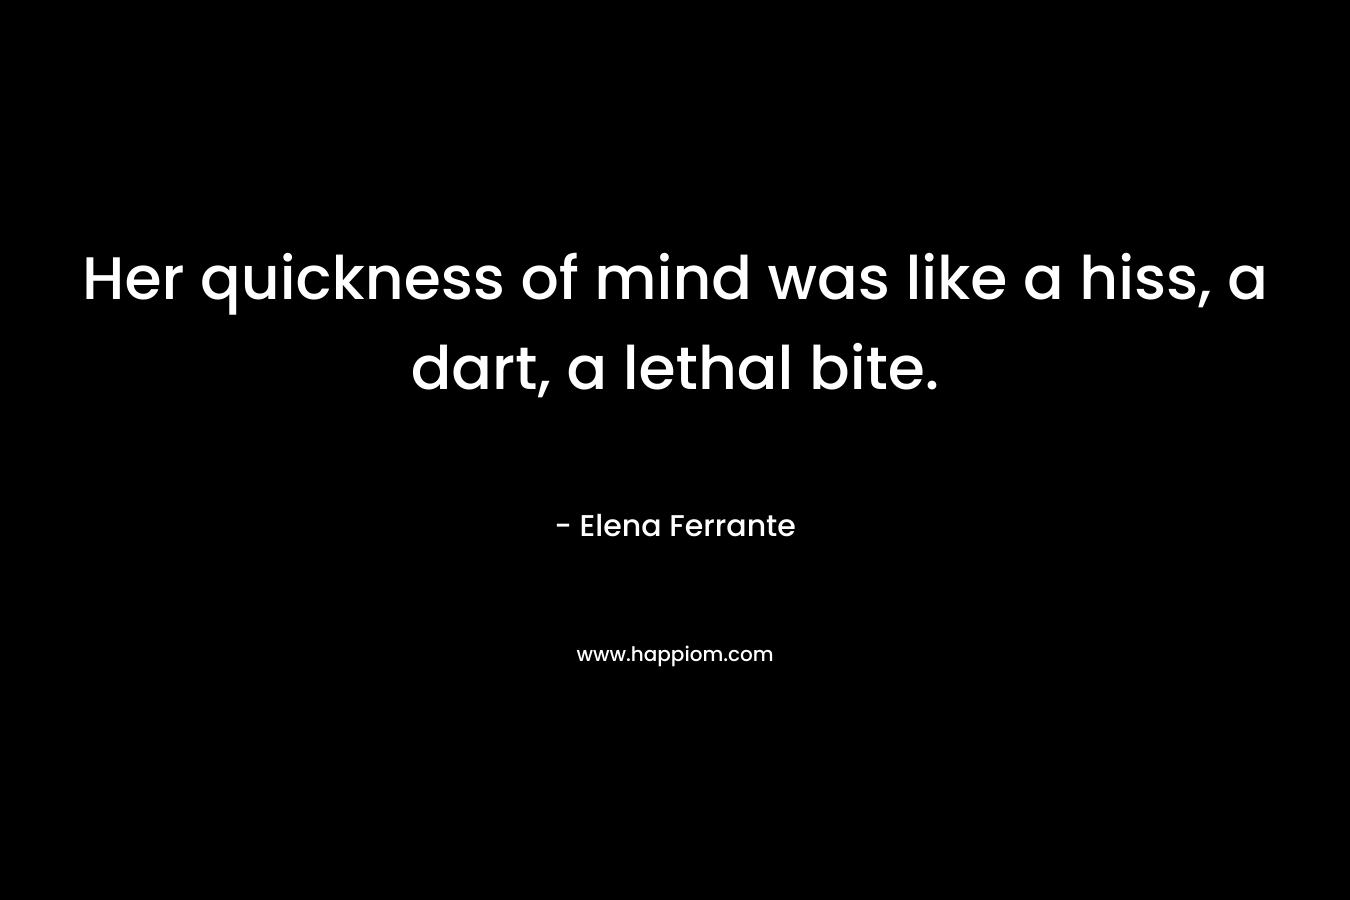 Her quickness of mind was like a hiss, a dart, a lethal bite. – Elena Ferrante